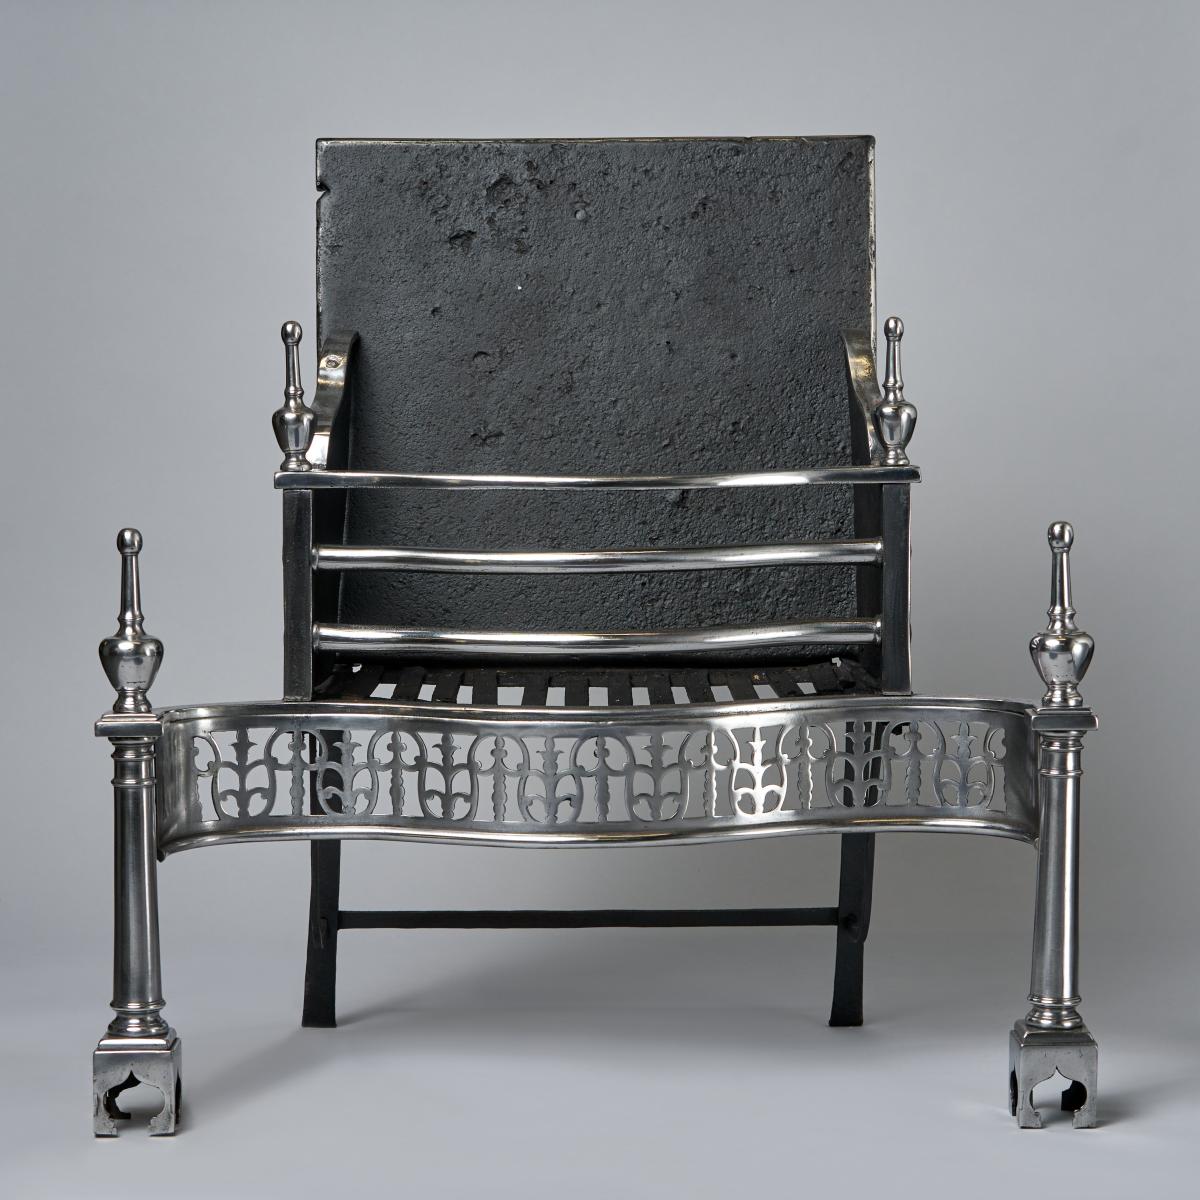 18th century English polished steel firegrate